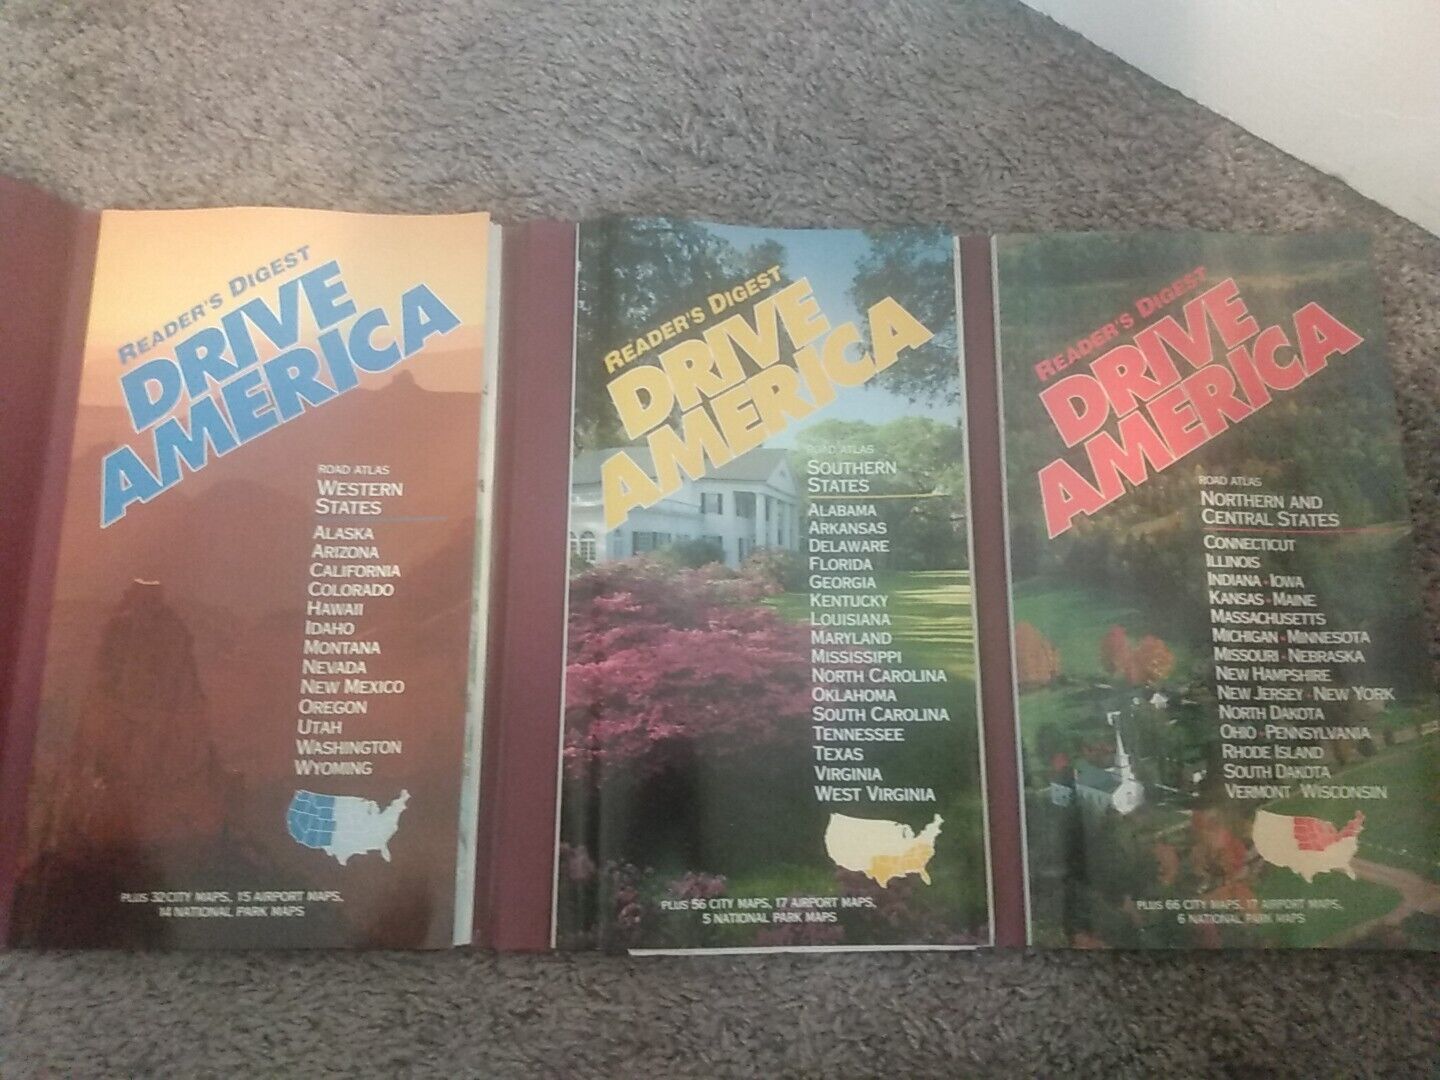 3 READERS DIGEST DRIVE AMERICA ROAD ATLAS LOT 3 WEST SOUTH NORTH CENTRAL STATES